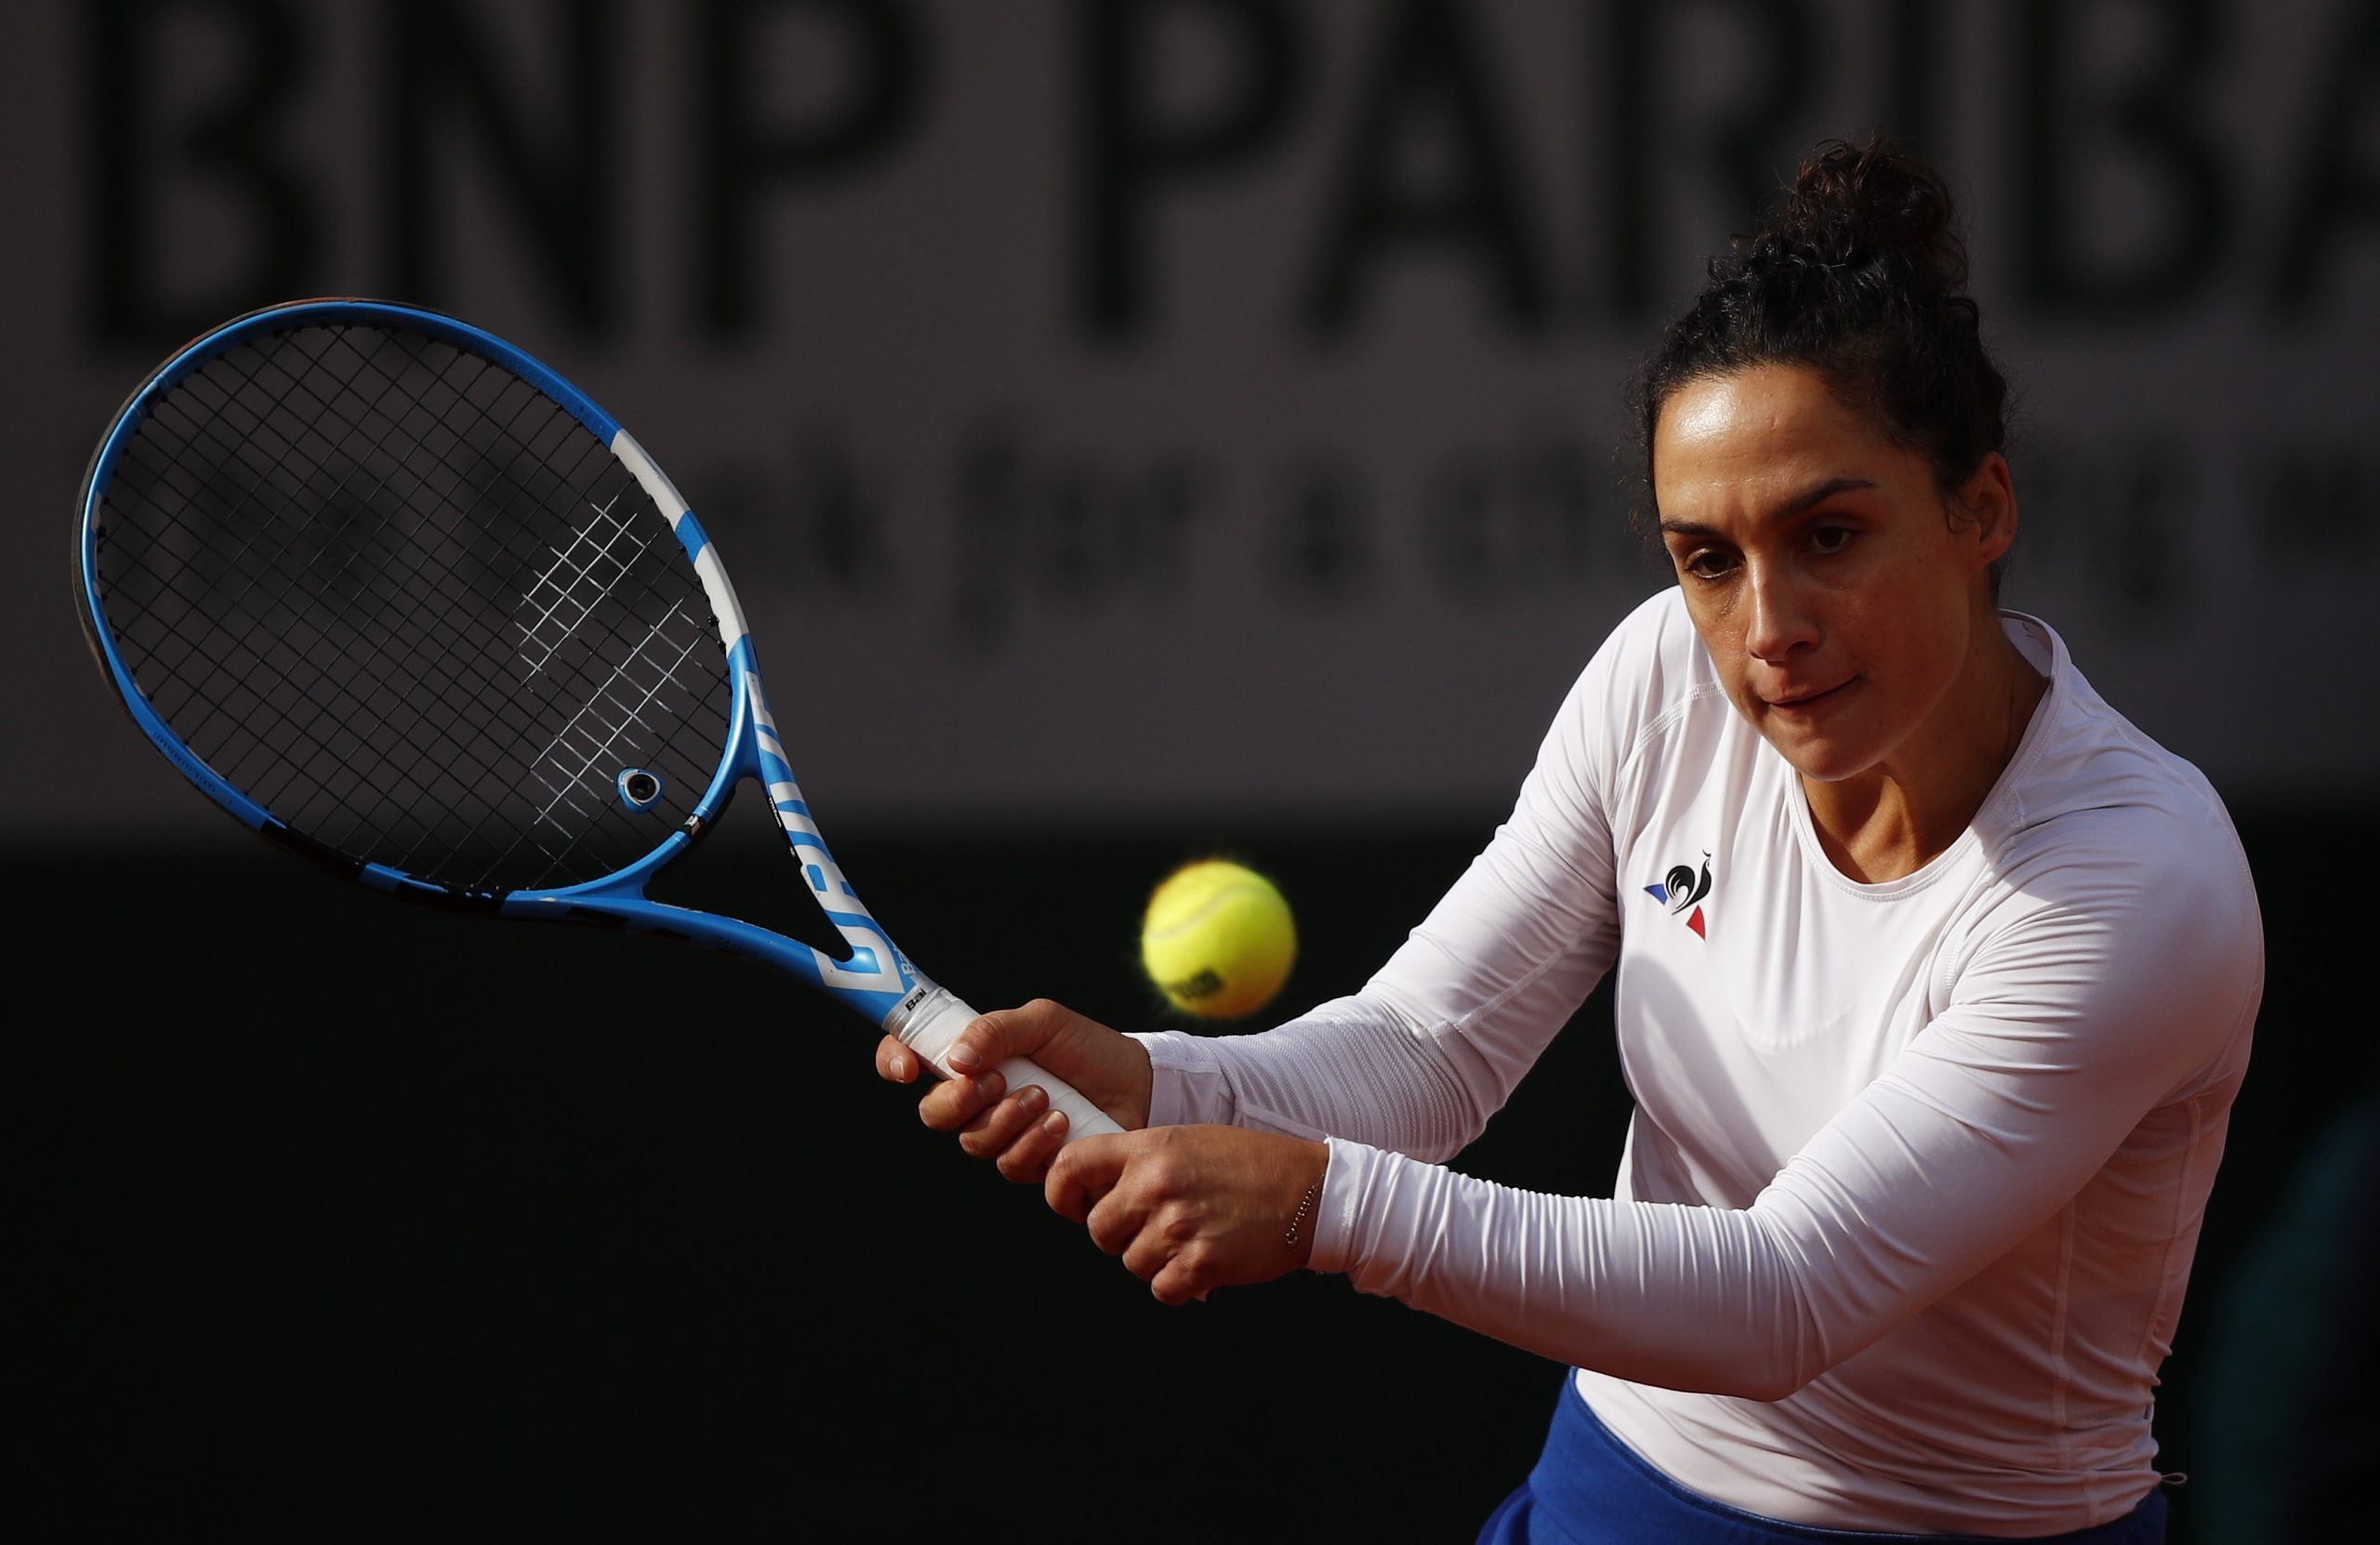 epa08719204 Martina Trevisan of Italy hits a backhand during her fourth round match against Kiki Bertens of the Netherlands during the French Open tennis tournament at Roland Garros in Paris, France, 04 October 2020.  EPA/YOAN VALAT